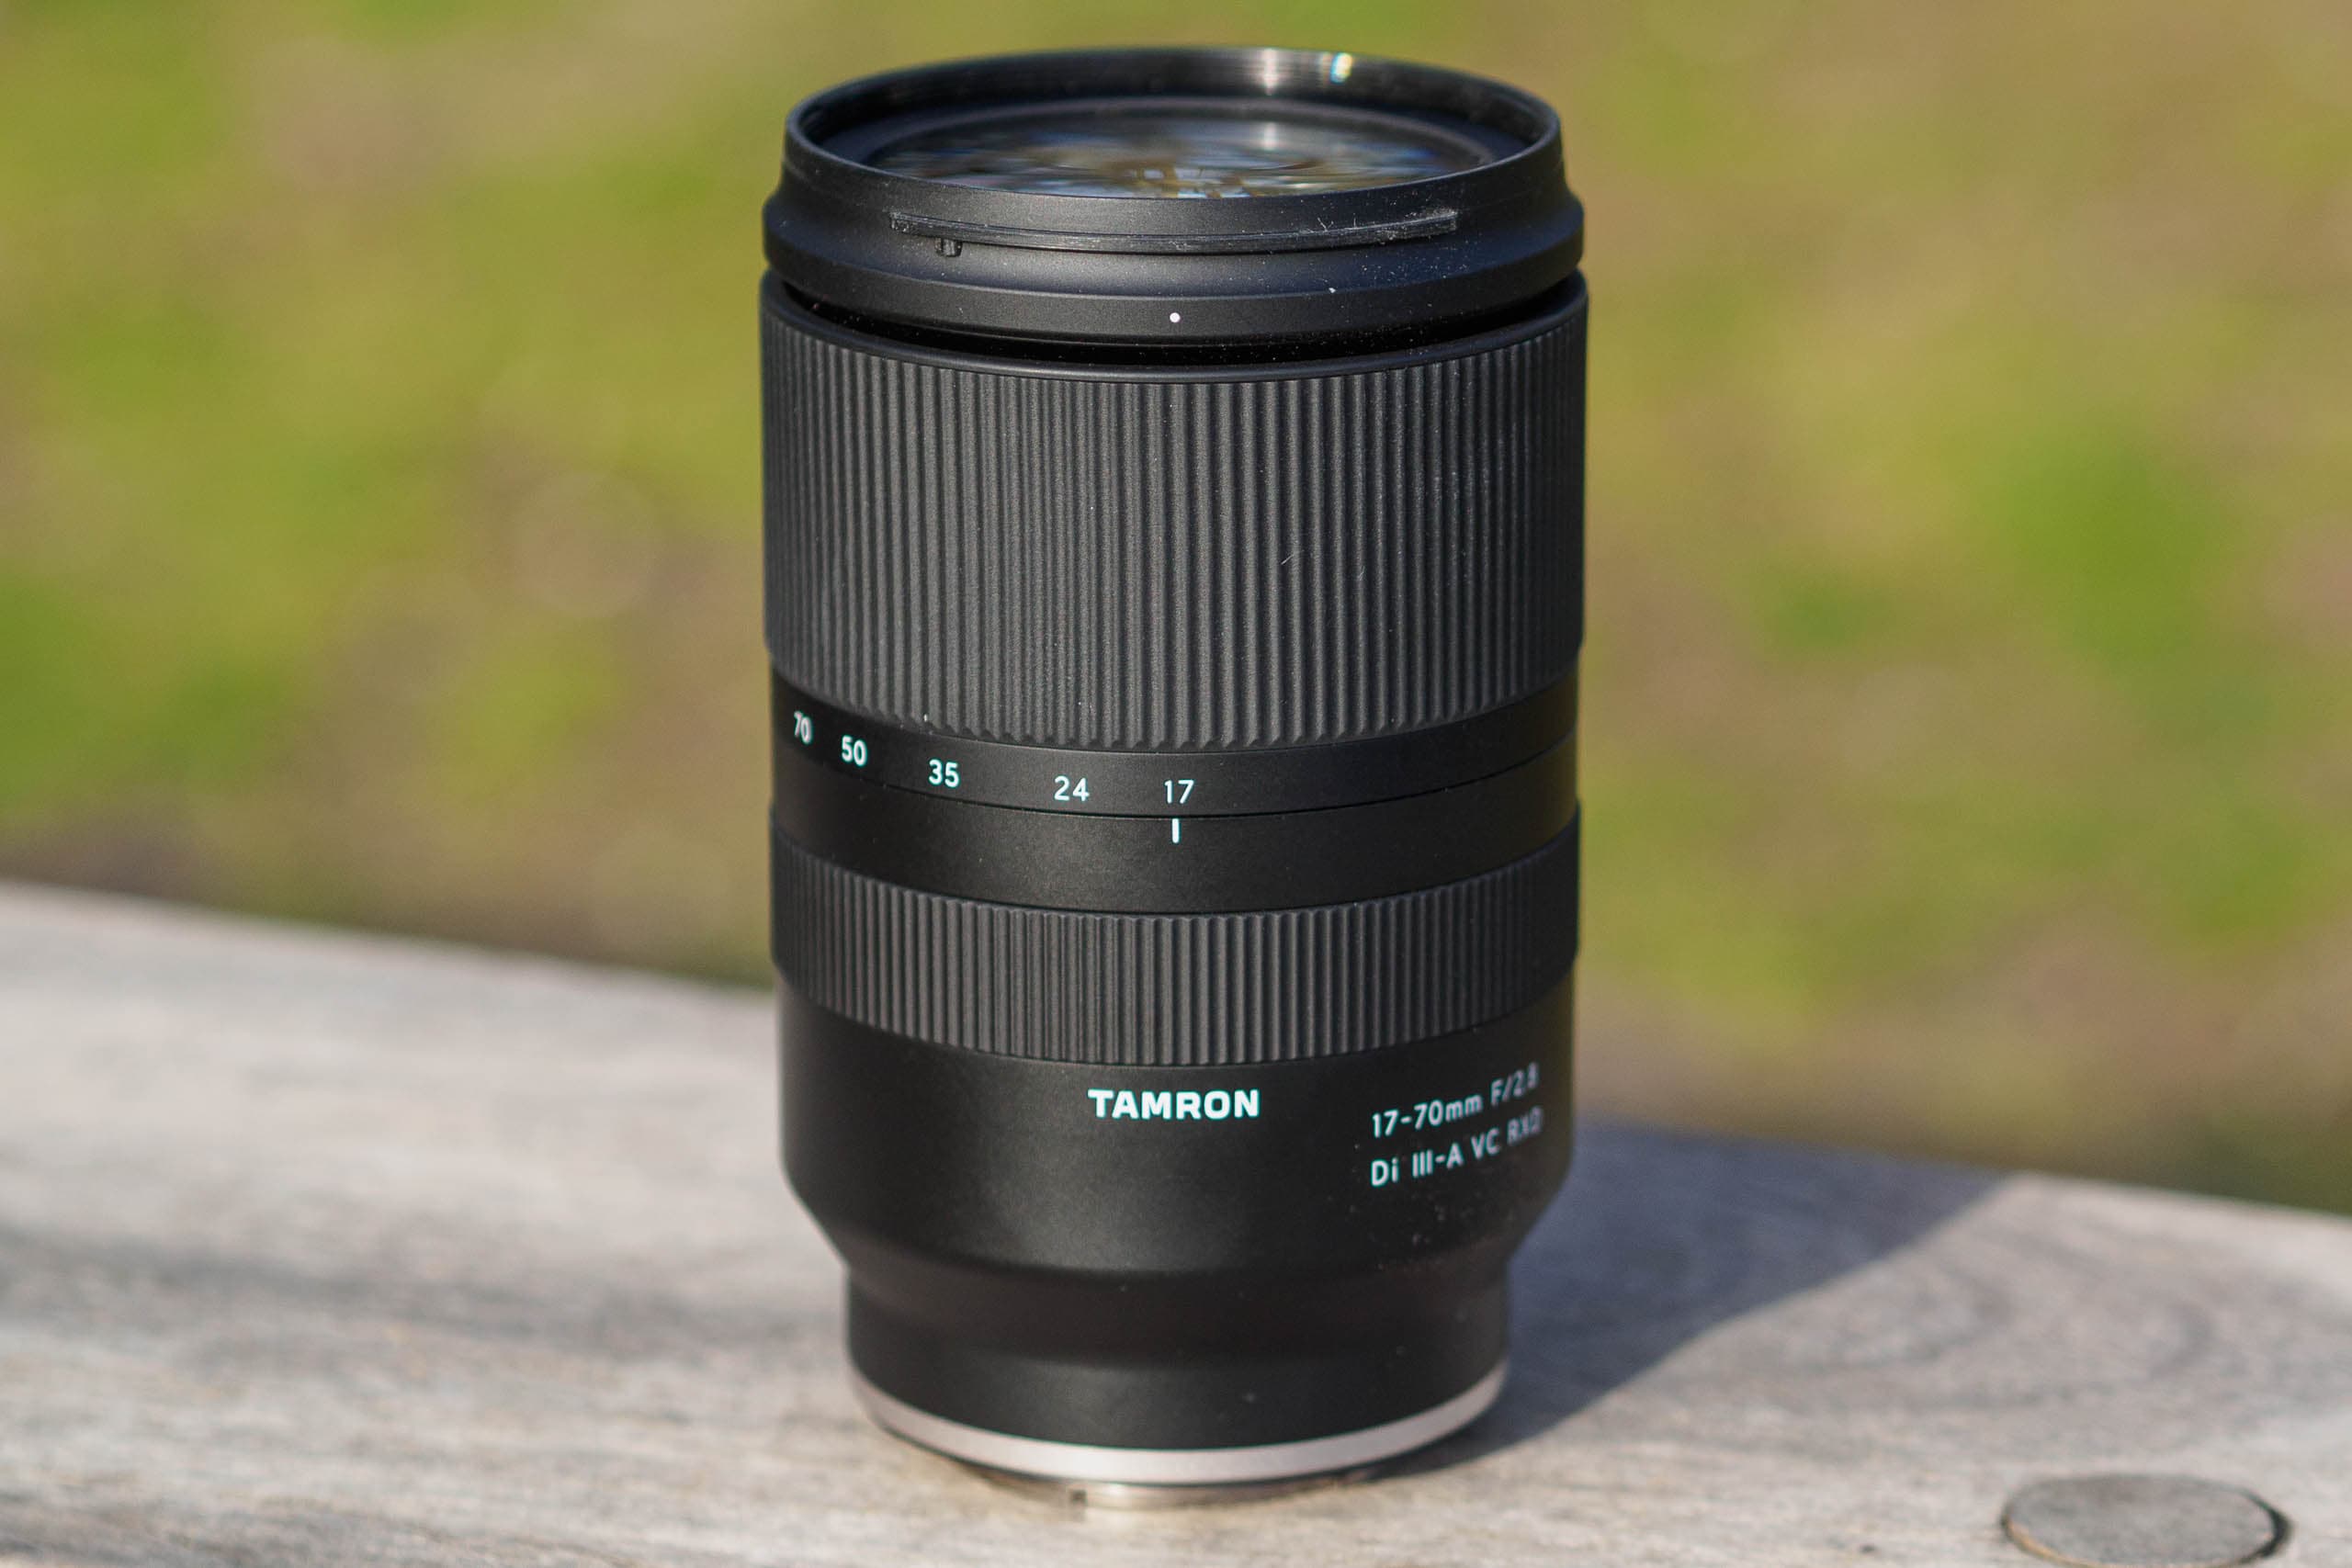 Tamron 17-70mm F/2.8 Di III-A VC RXD review - Amateur 